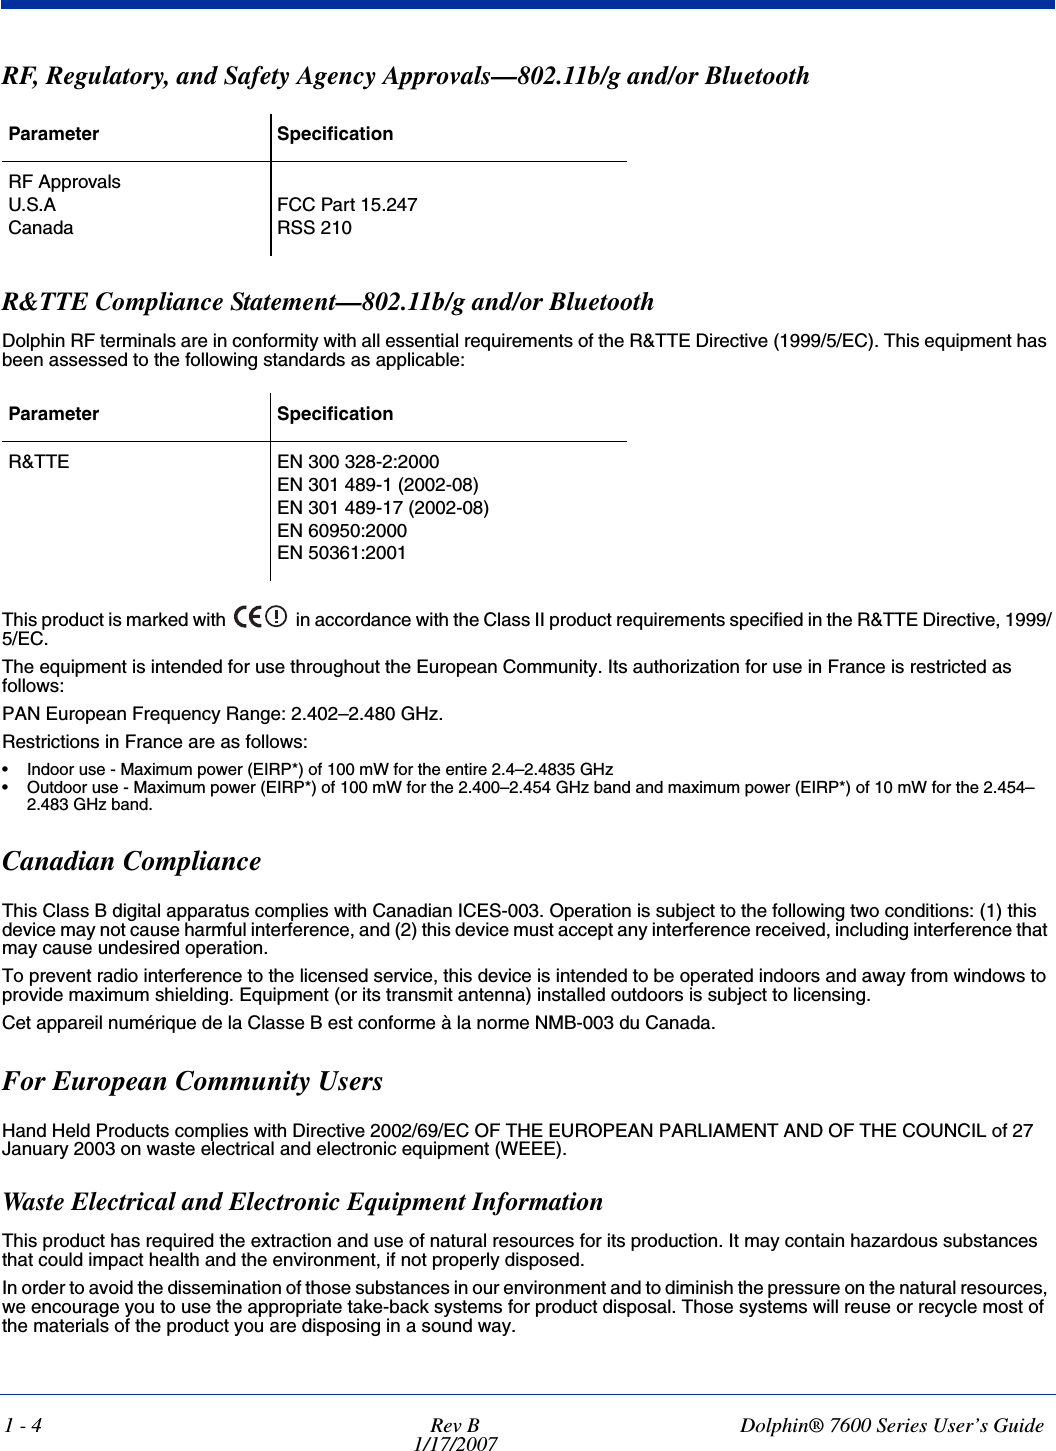 1 - 4 Rev B1/17/2007Dolphin® 7600 Series User’s GuideRF, Regulatory, and Safety Agency Approvals—802.11b/g and/or Bluetooth R&amp;TTE Compliance Statement—802.11b/g and/or BluetoothDolphin RF terminals are in conformity with all essential requirements of the R&amp;TTE Directive (1999/5/EC). This equipment has been assessed to the following standards as applicable: This product is marked with   in accordance with the Class II product requirements specified in the R&amp;TTE Directive, 1999/5/EC.The equipment is intended for use throughout the European Community. Its authorization for use in France is restricted as follows:PAN European Frequency Range: 2.402–2.480 GHz.Restrictions in France are as follows: • Indoor use - Maximum power (EIRP*) of 100 mW for the entire 2.4–2.4835 GHz • Outdoor use - Maximum power (EIRP*) of 100 mW for the 2.400–2.454 GHz band and maximum power (EIRP*) of 10 mW for the 2.454–2.483 GHz band.Canadian ComplianceThis Class B digital apparatus complies with Canadian ICES-003. Operation is subject to the following two conditions: (1) this device may not cause harmful interference, and (2) this device must accept any interference received, including interference that may cause undesired operation. To prevent radio interference to the licensed service, this device is intended to be operated indoors and away from windows to provide maximum shielding. Equipment (or its transmit antenna) installed outdoors is subject to licensing.Cet appareil numérique de la Classe B est conforme à la norme NMB-003 du Canada.For European Community UsersHand Held Products complies with Directive 2002/69/EC OF THE EUROPEAN PARLIAMENT AND OF THE COUNCIL of 27 January 2003 on waste electrical and electronic equipment (WEEE).Waste Electrical and Electronic Equipment InformationThis product has required the extraction and use of natural resources for its production. It may contain hazardous substances that could impact health and the environment, if not properly disposed.In order to avoid the dissemination of those substances in our environment and to diminish the pressure on the natural resources, we encourage you to use the appropriate take-back systems for product disposal. Those systems will reuse or recycle most of the materials of the product you are disposing in a sound way.Parameter SpecificationRF ApprovalsU.S.ACanadaFCC Part 15.247RSS 210 Parameter SpecificationR&amp;TTE EN 300 328-2:2000EN 301 489-1 (2002-08)EN 301 489-17 (2002-08)EN 60950:2000EN 50361:2001